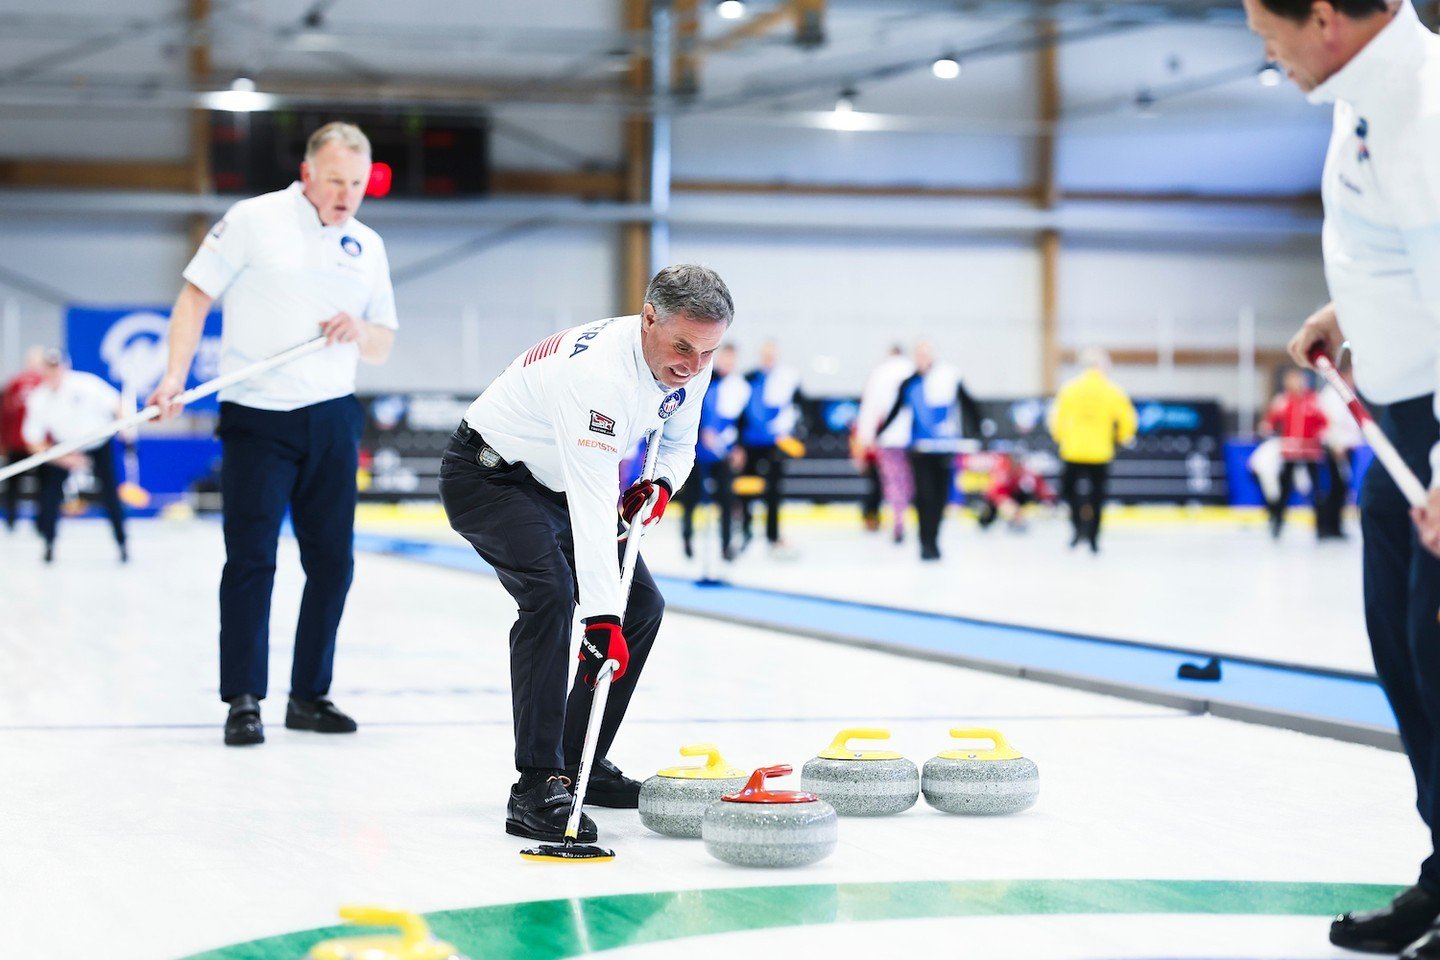 The World Senior Championships are well underway and USA is looking for spots in the playoffs. The U.S. Senior Men have a record of 3-1 and are sitting second in their pool. The USA Senior Women are 1-2 with two games left in pool play. 
GO USA 🇺🇸 